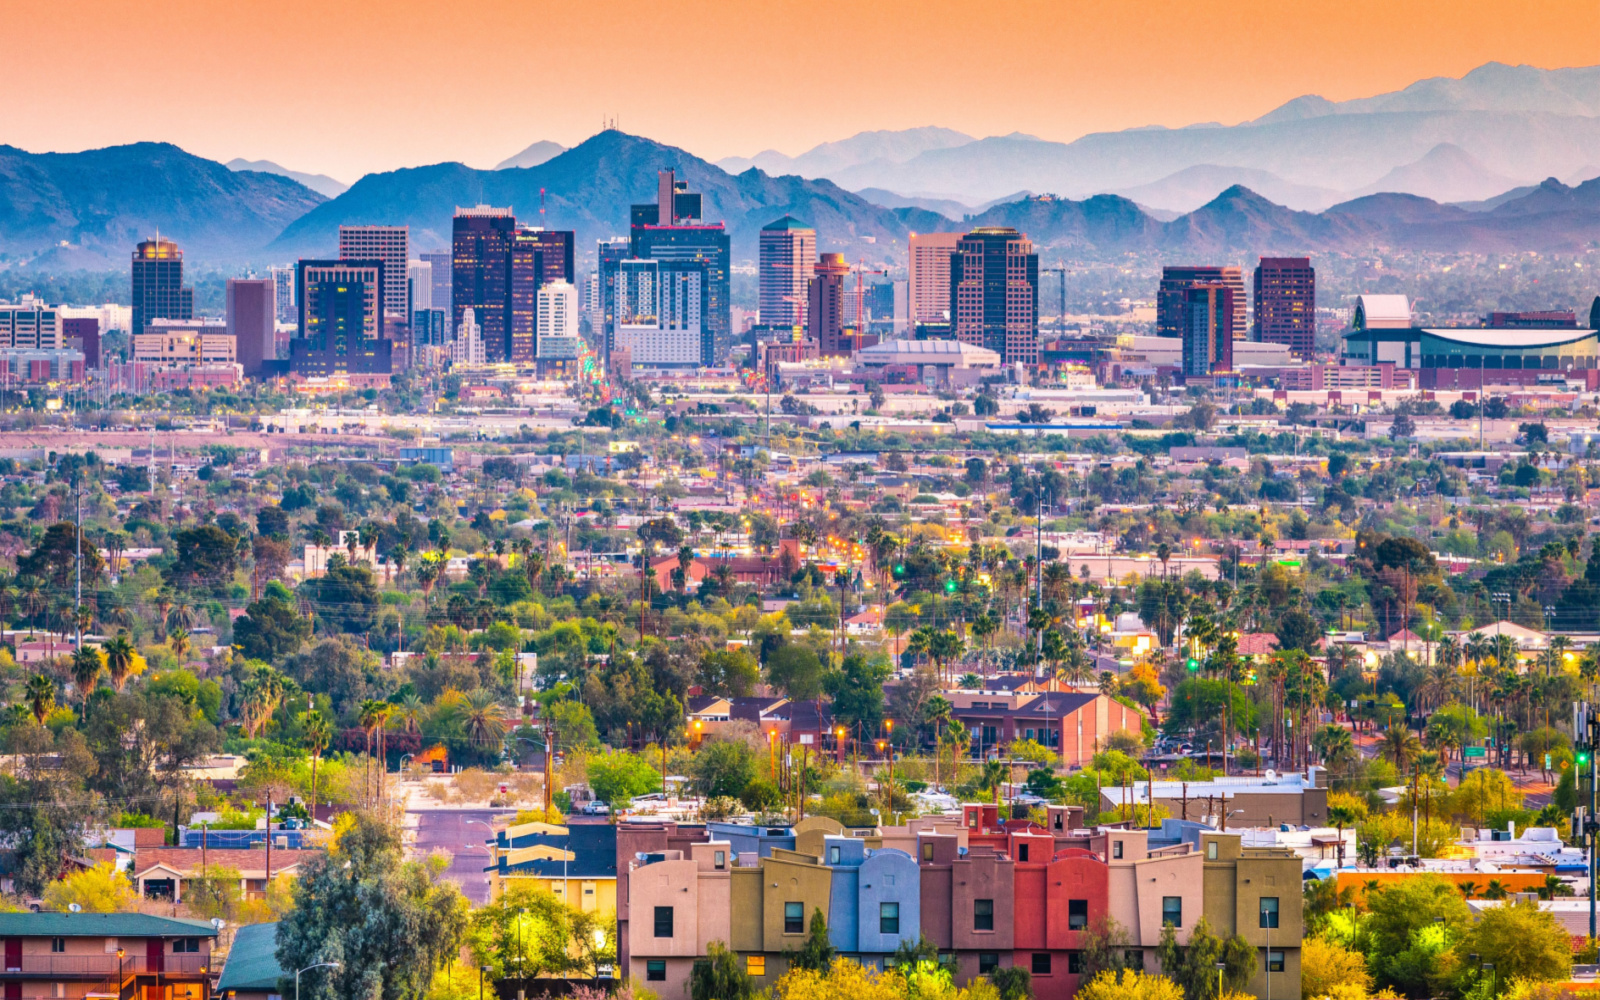 The 15 Best Airbnbs in Arizona in 2022